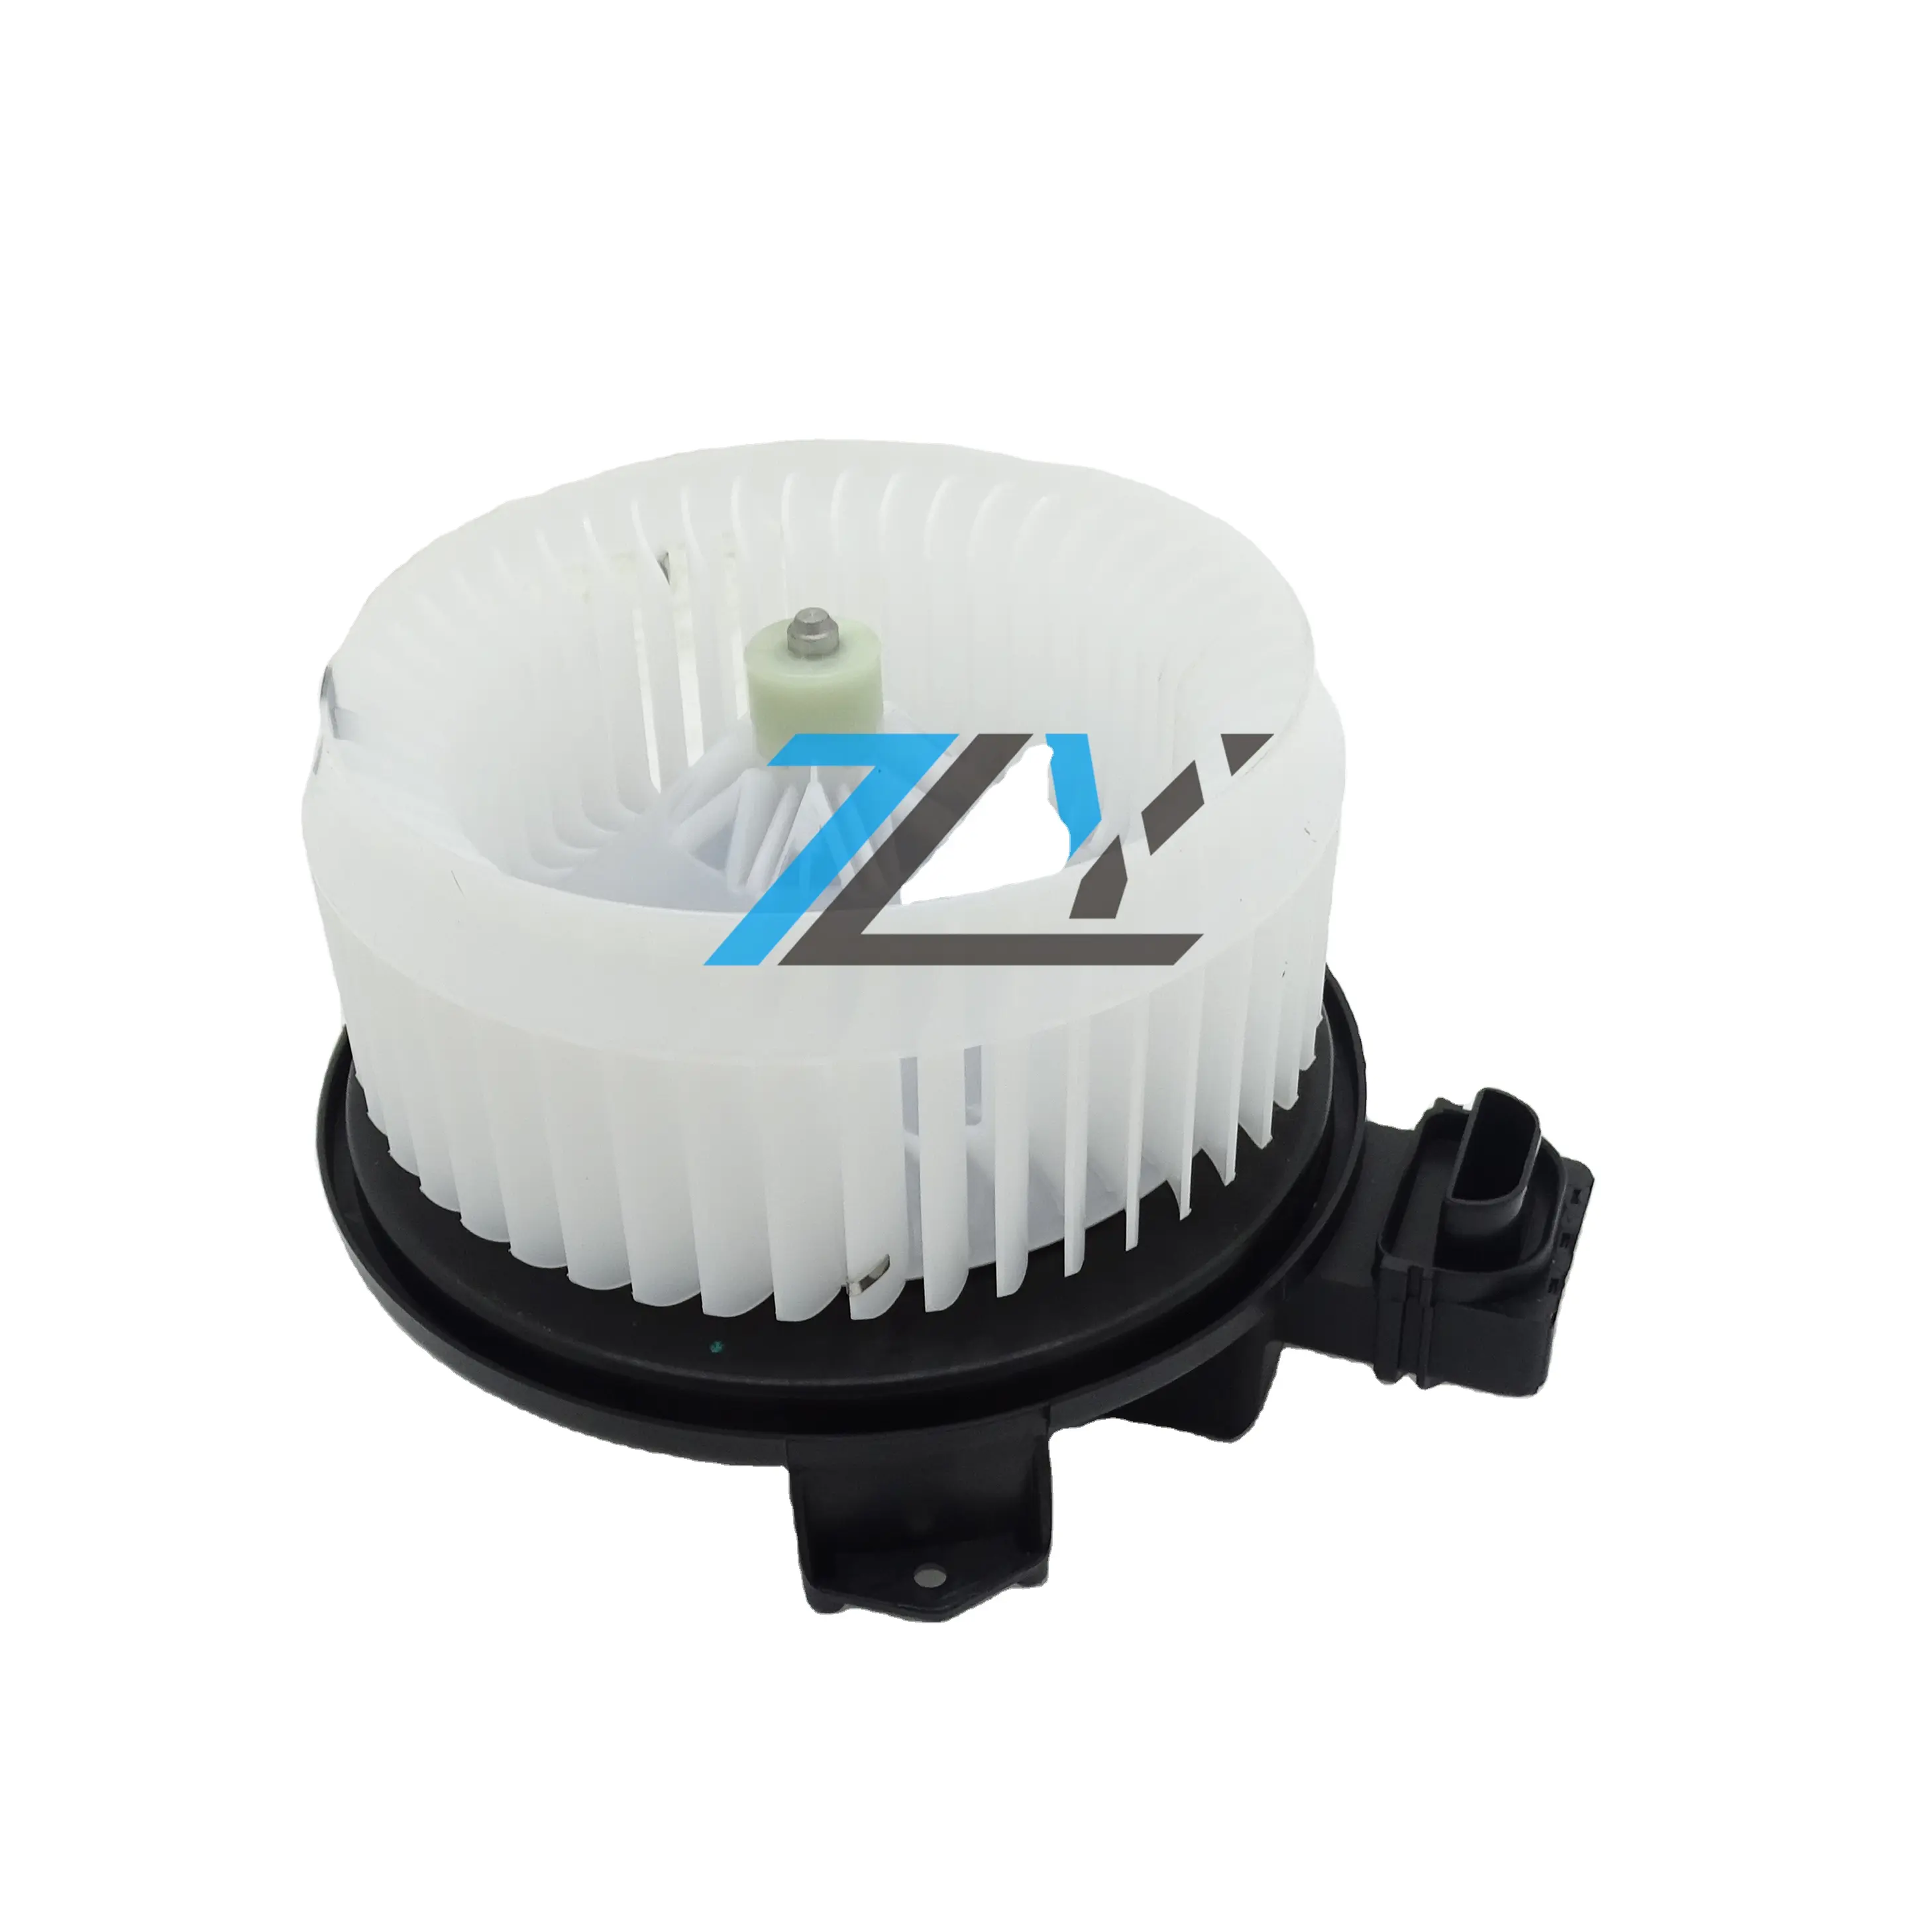 ND1163600030 air conditioning fan for excavator PC200-10 fan blower motor ND1163600030 excavator spare parts